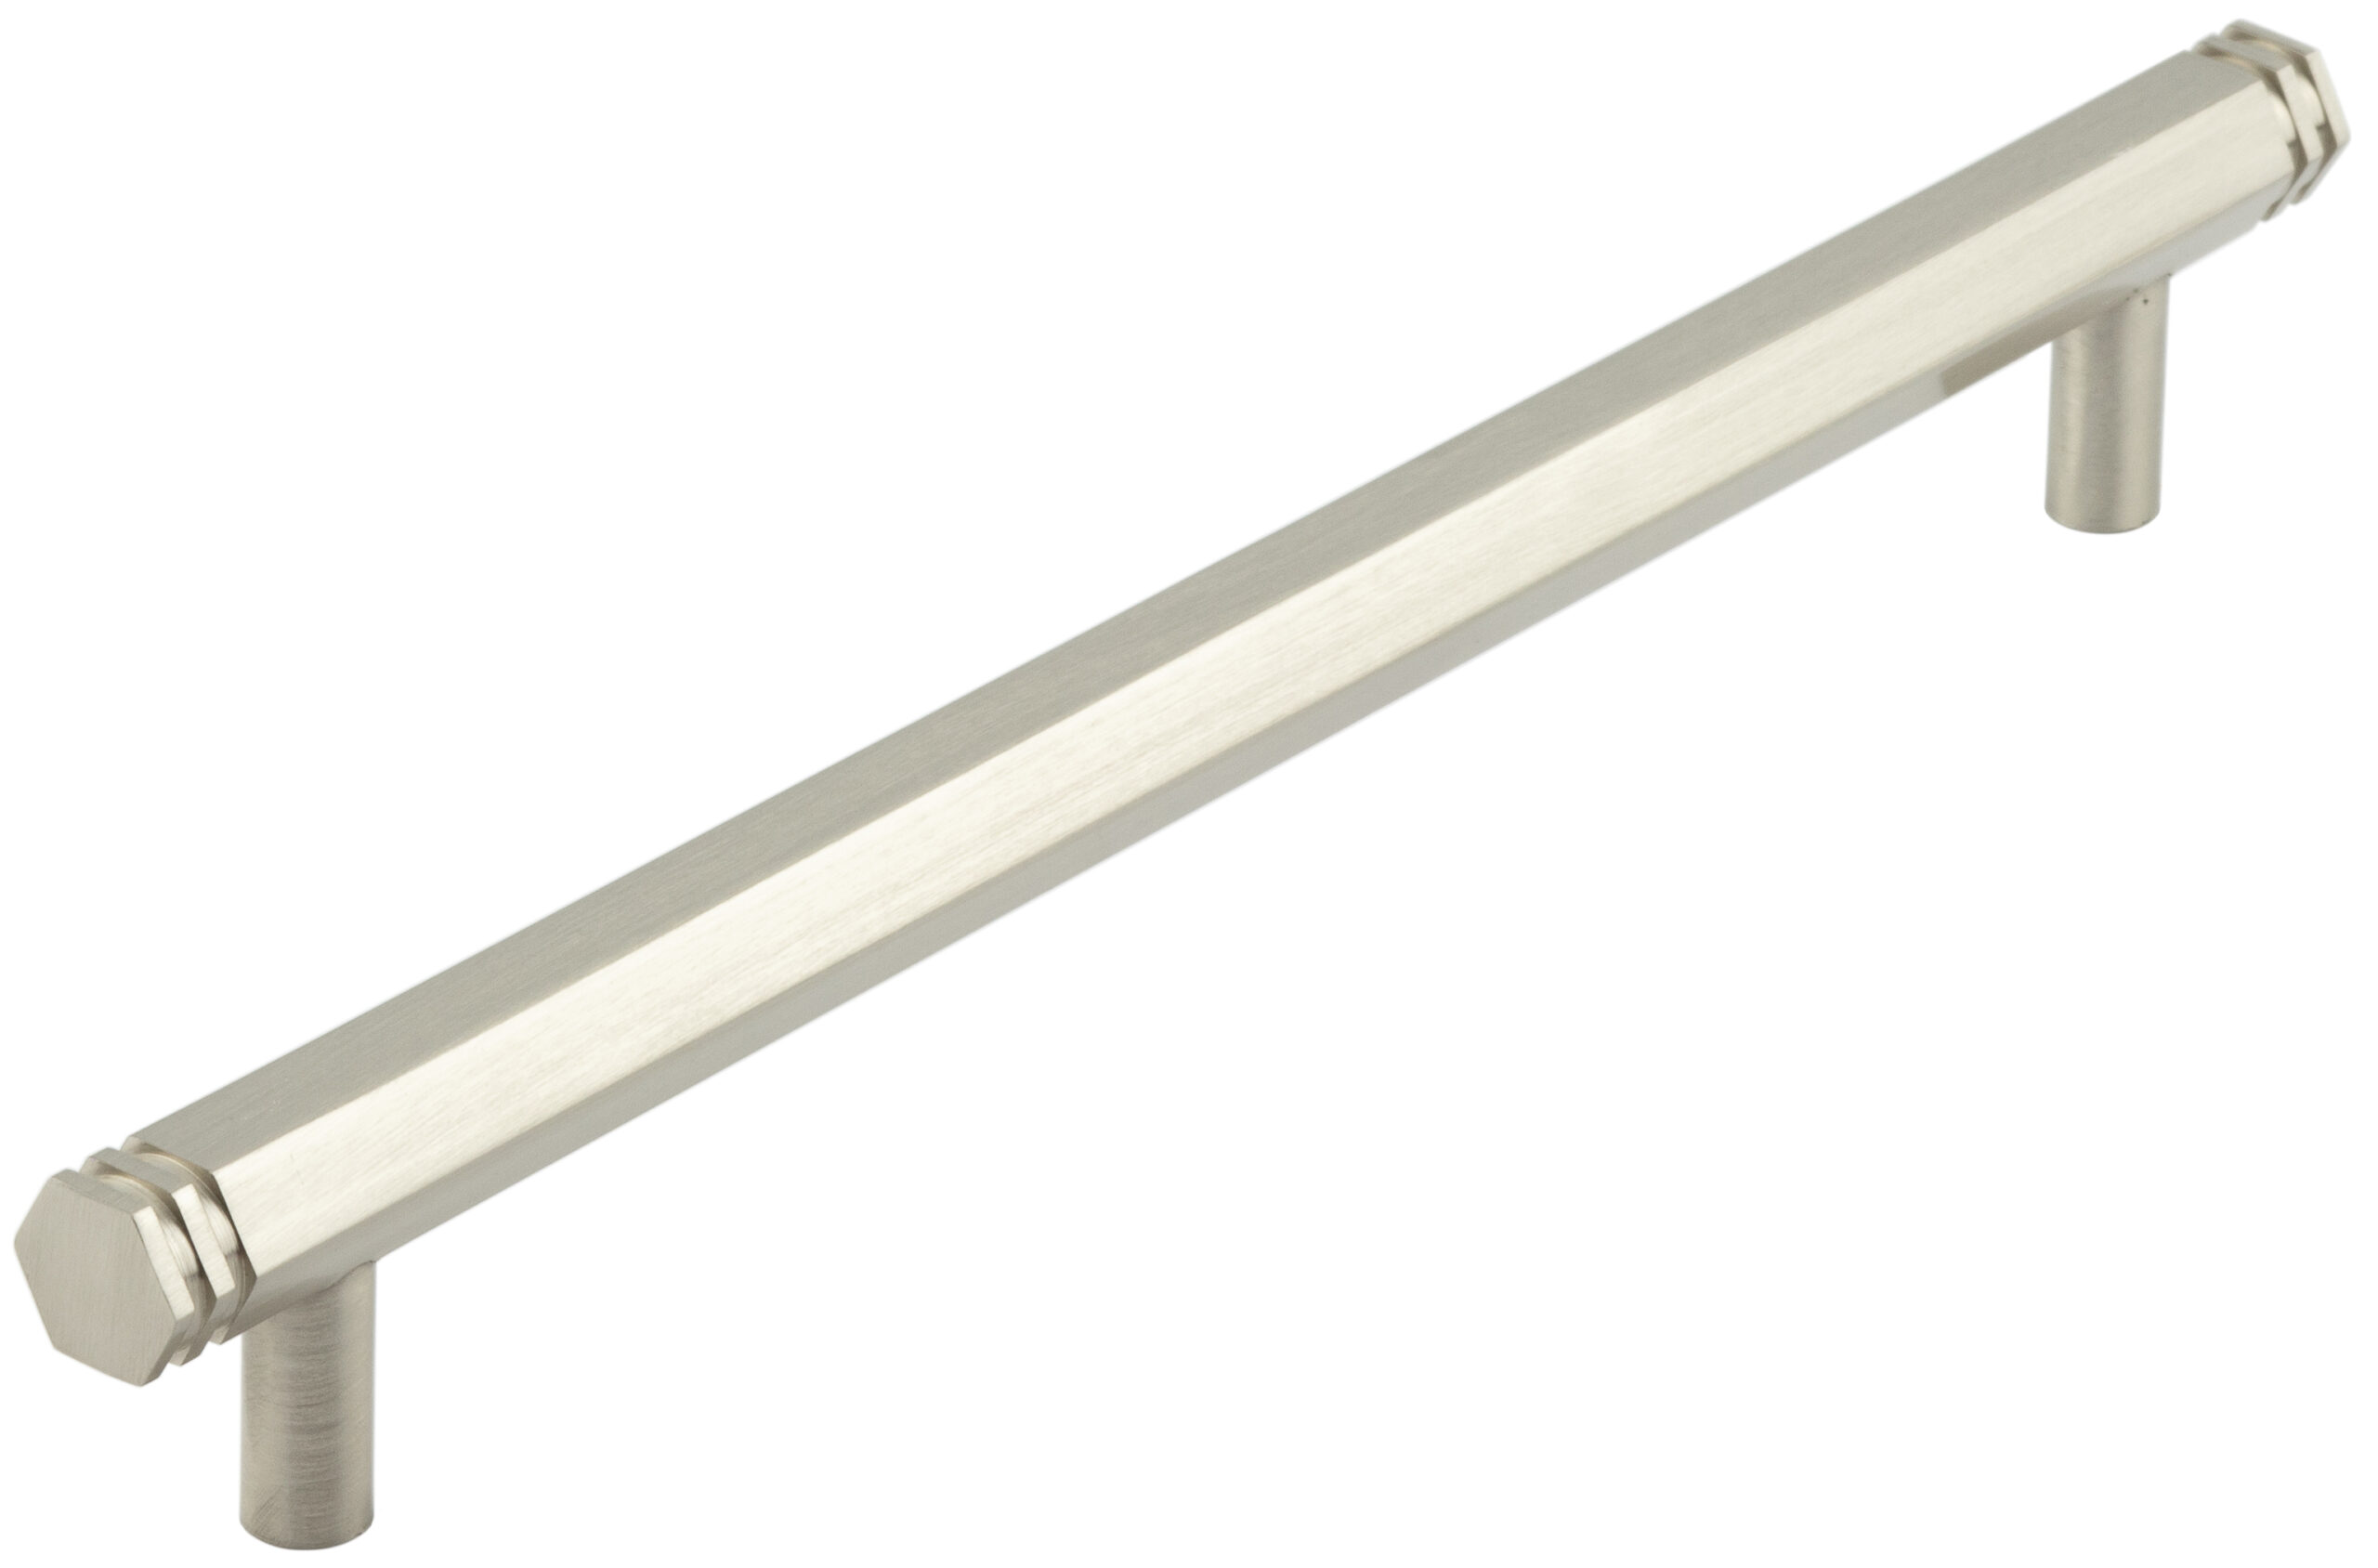 Nile Sn 224mm Hex Cabinet Handle With End Step Detail